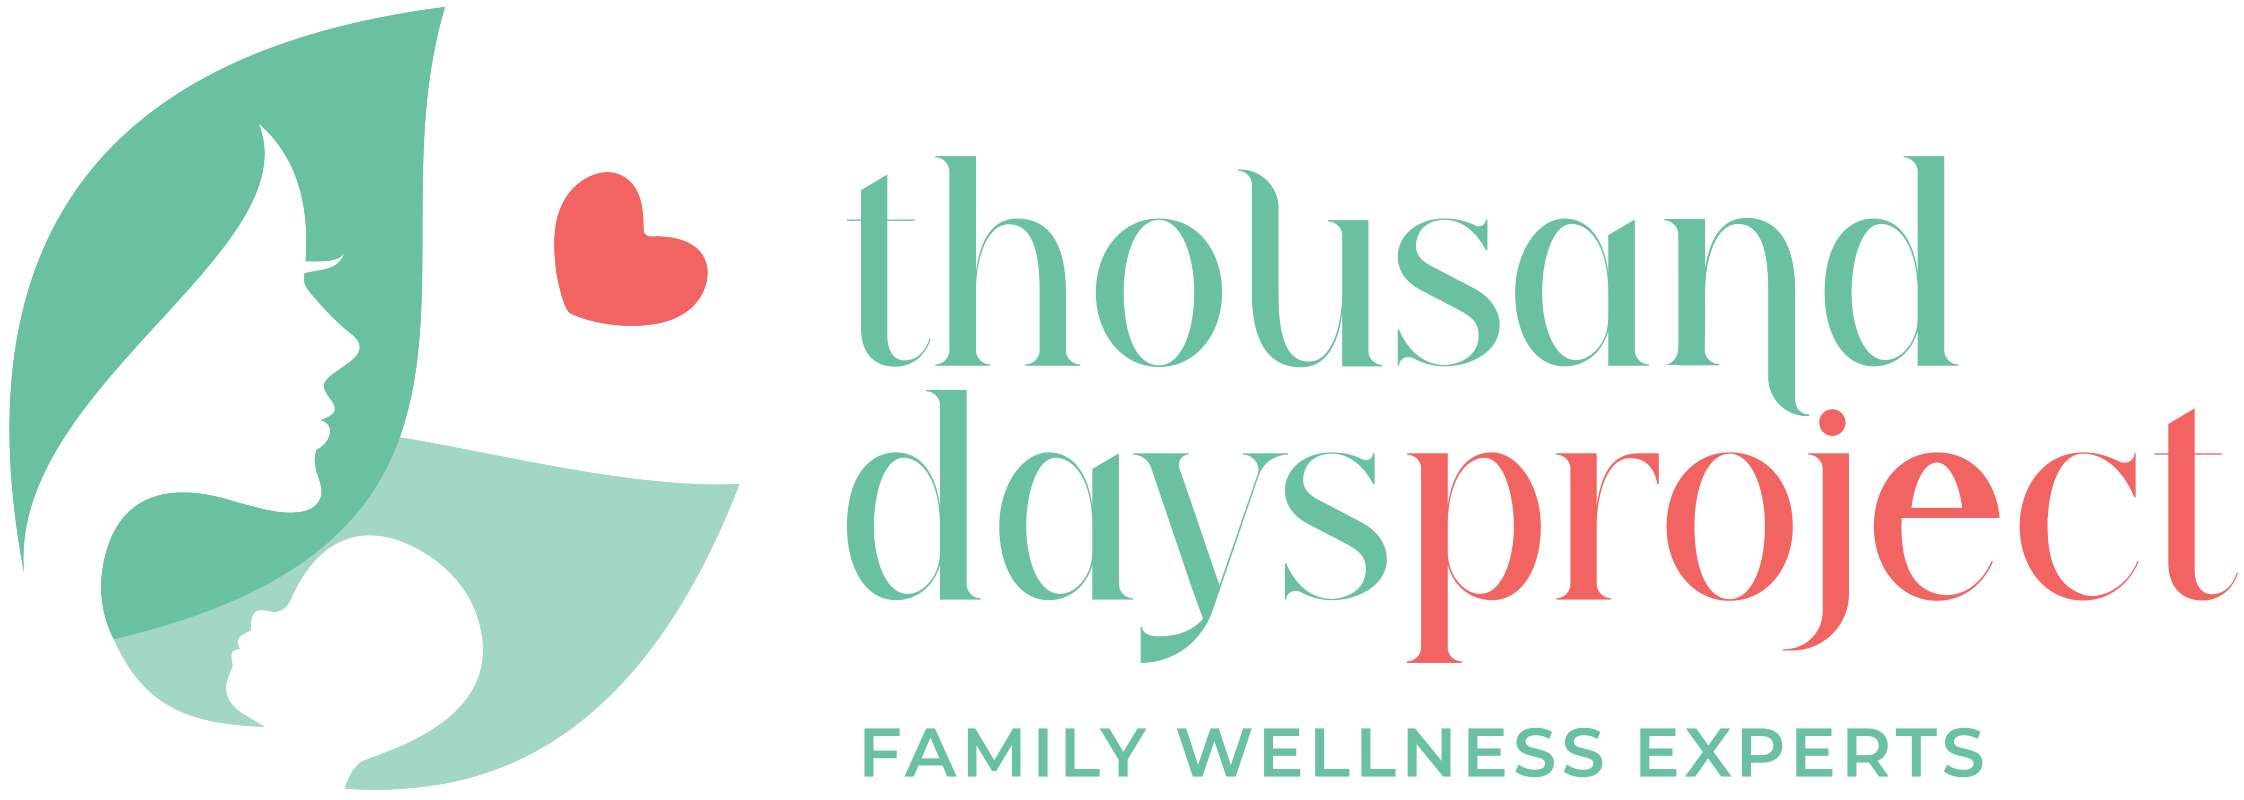 Thousand Days Project - Family Wellness Experts